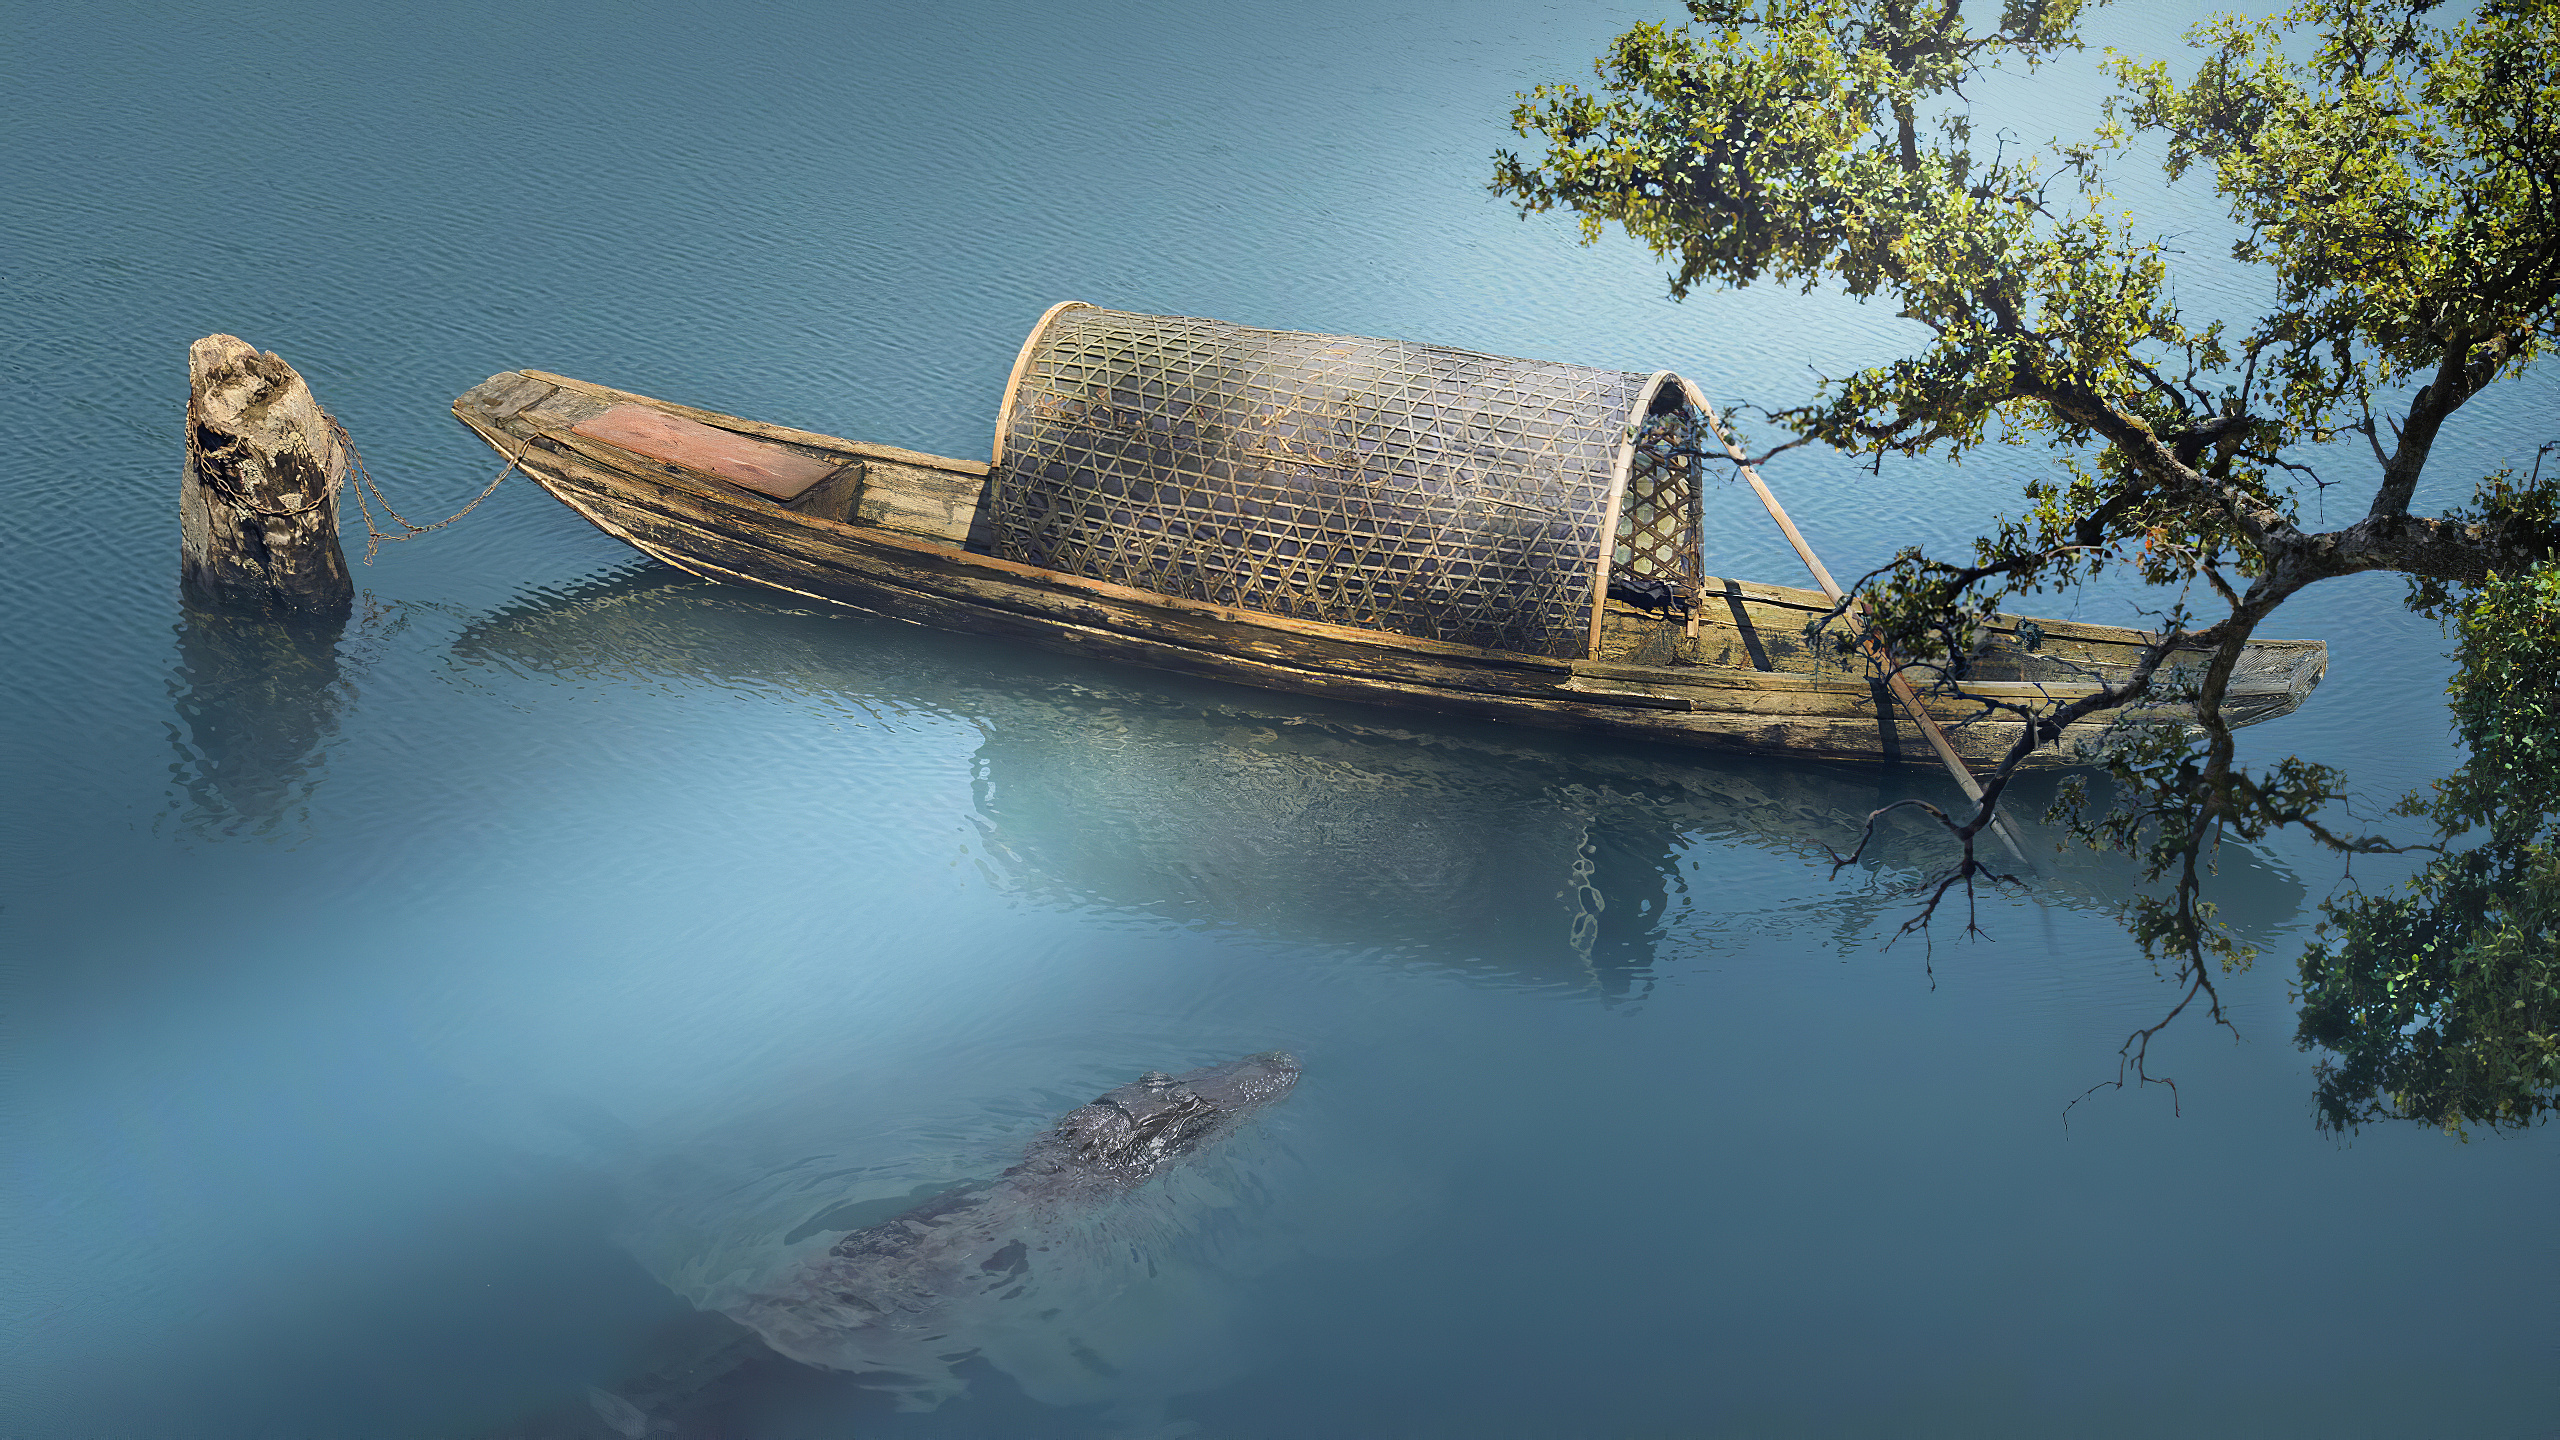 General 2560x1440 crocodiles water boat branch calm calm waters nature vehicle animals